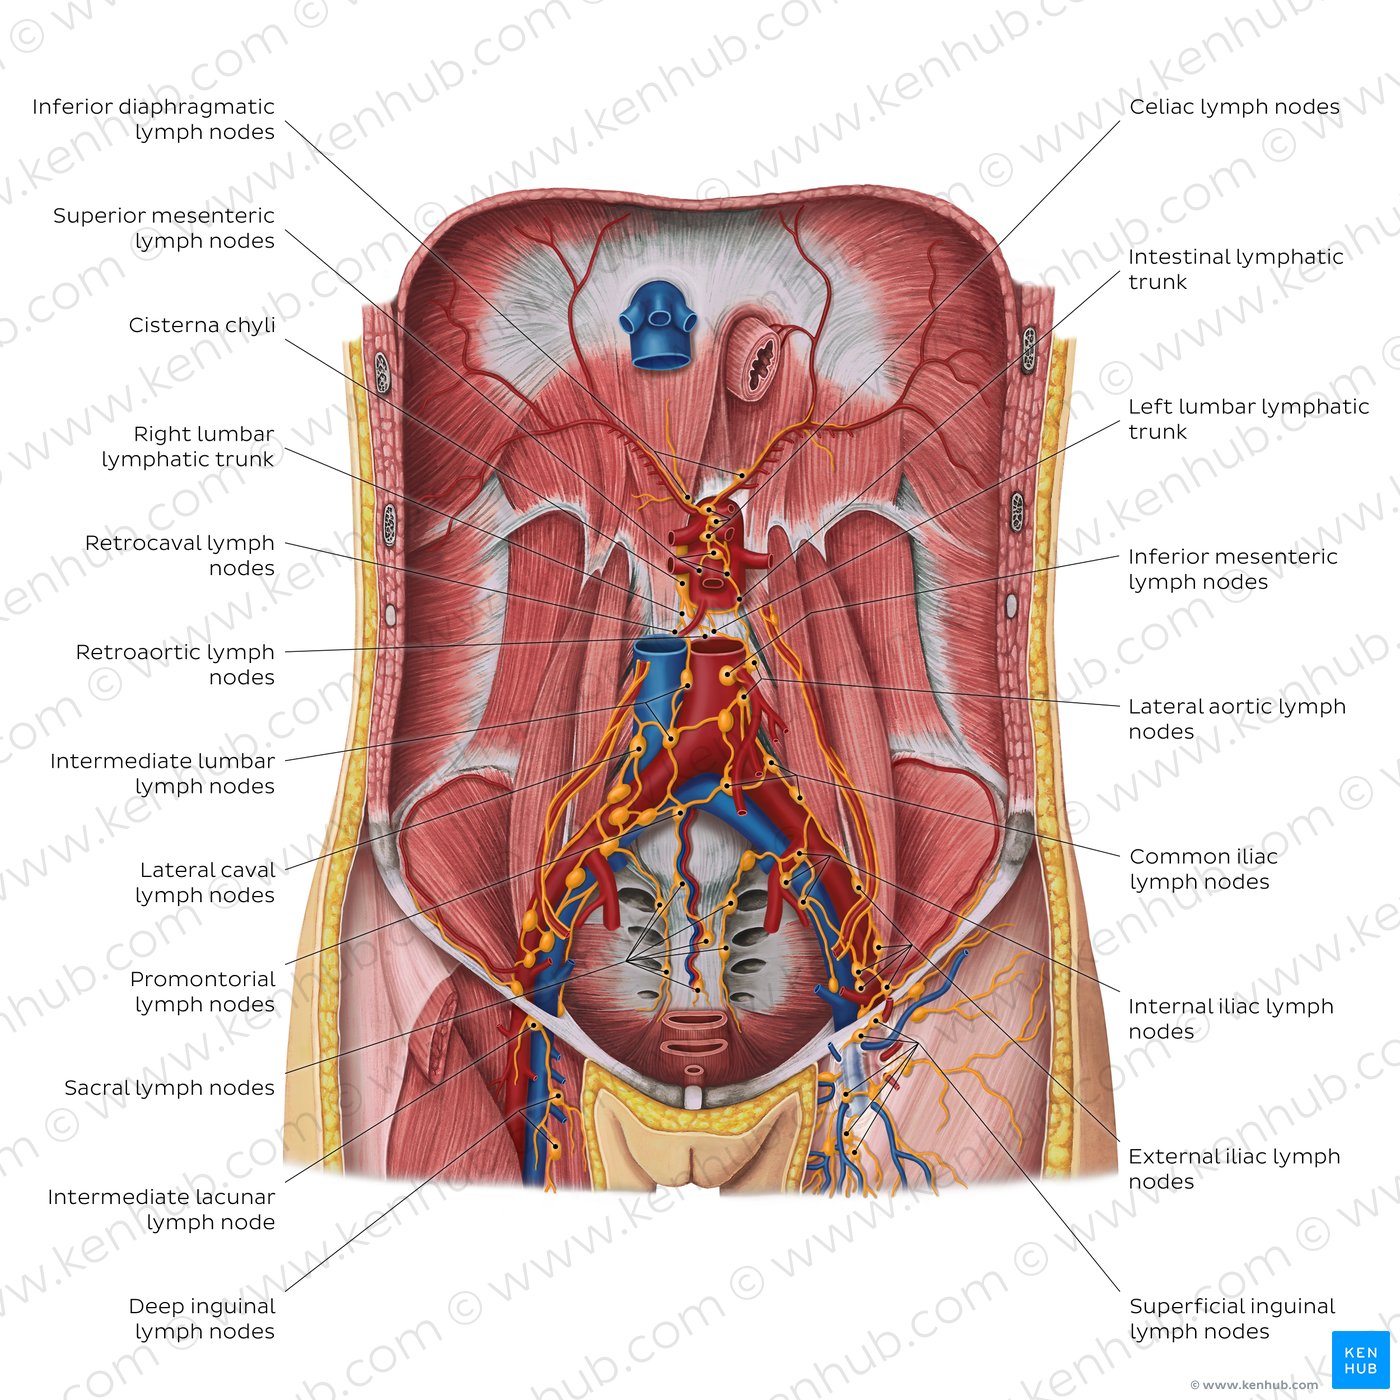 Lymphatics of the posterior abdominal wall